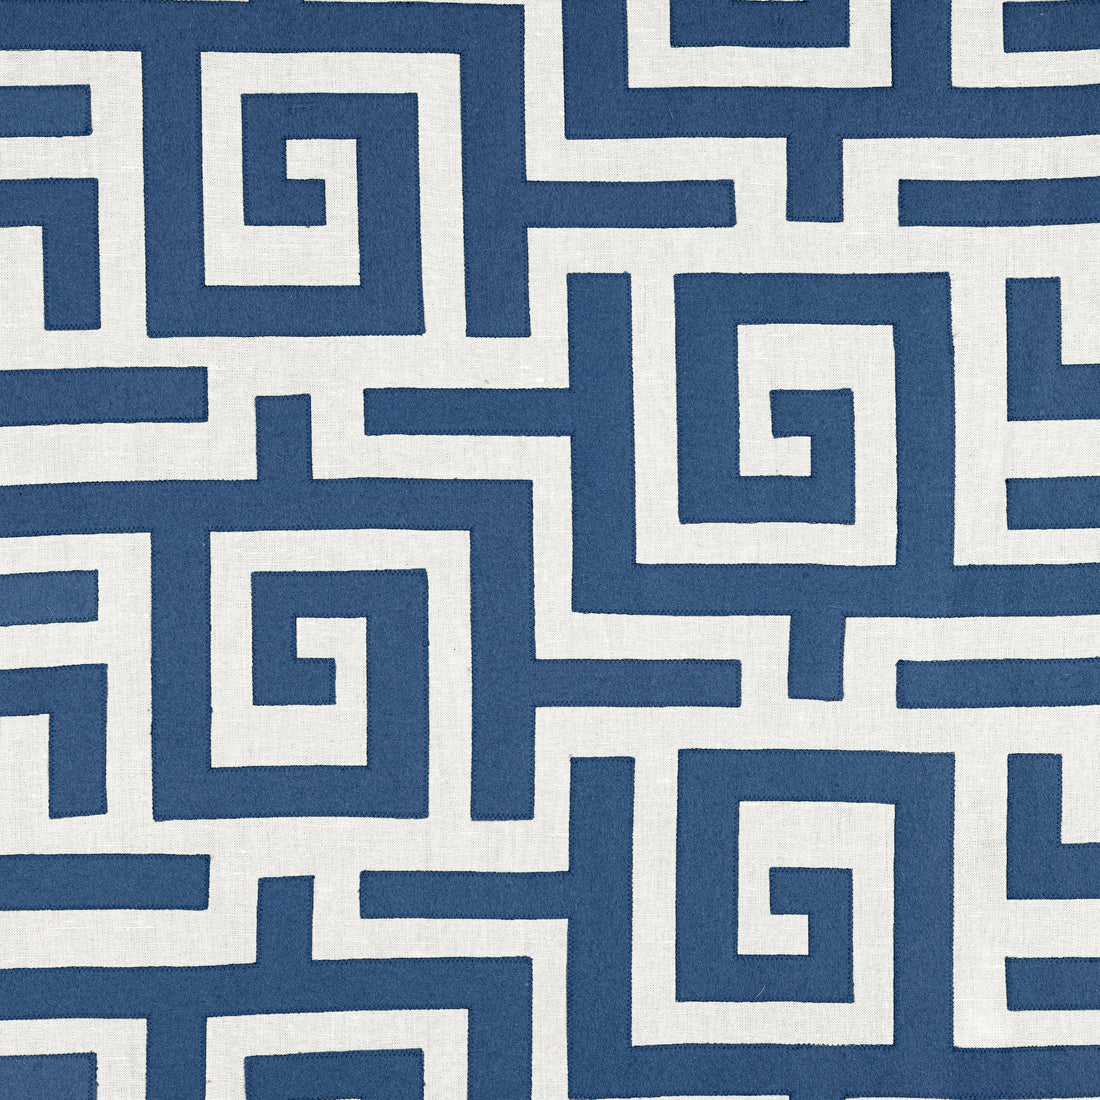 Tulum Applique fabric in navy color - pattern number W713225 - by Thibaut in the Mesa collection